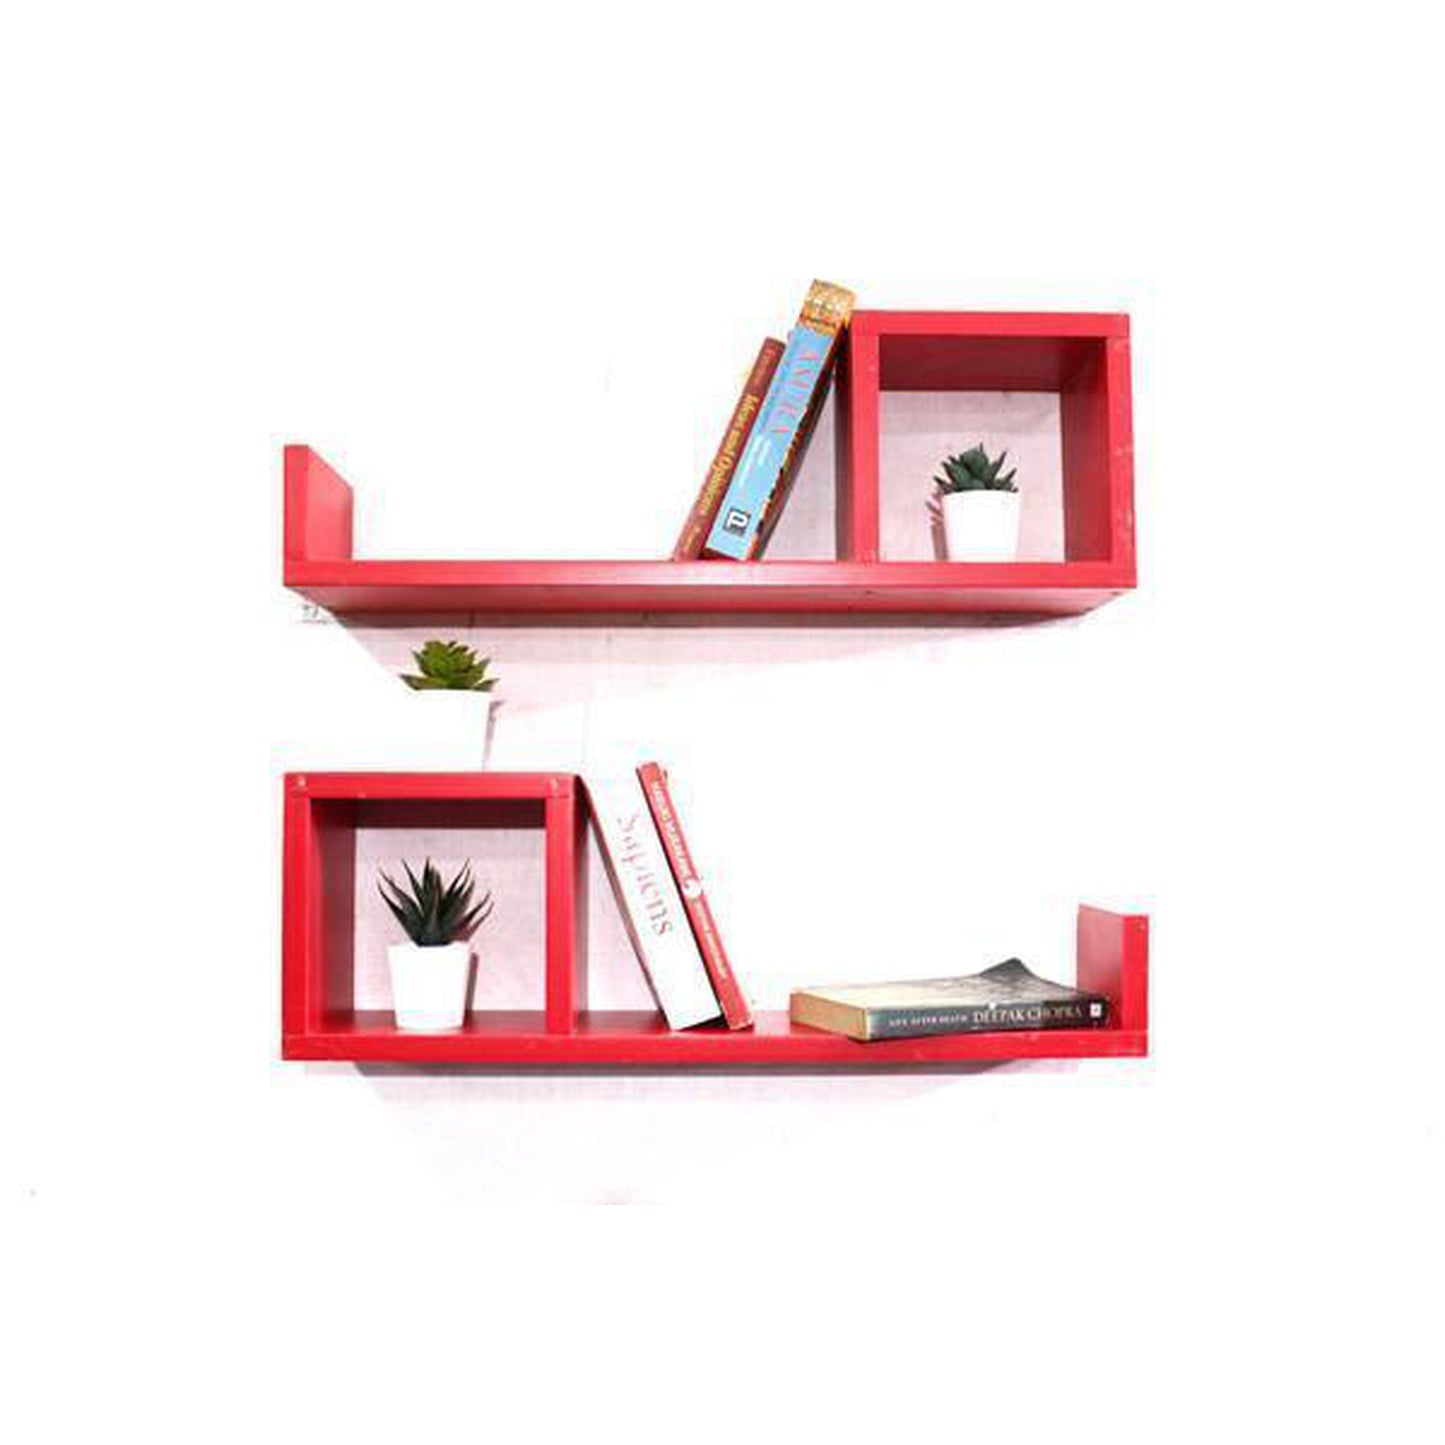 Wooden bookshelves set of two - The Teal Thread